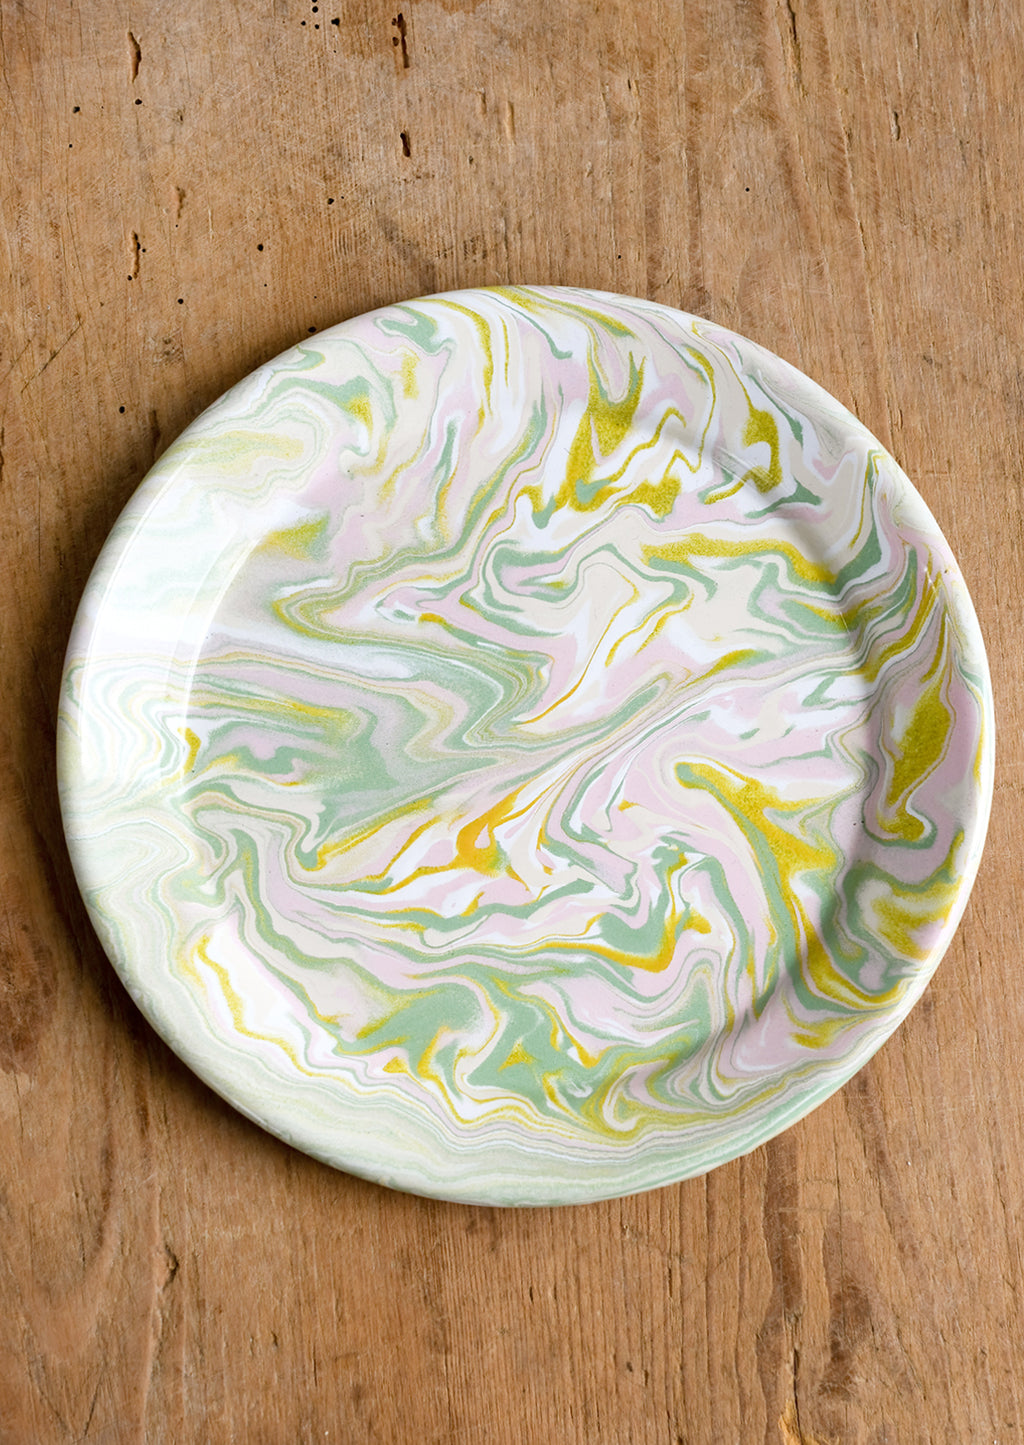 1: A round enamel plate with swirl pattern in pastel hues.